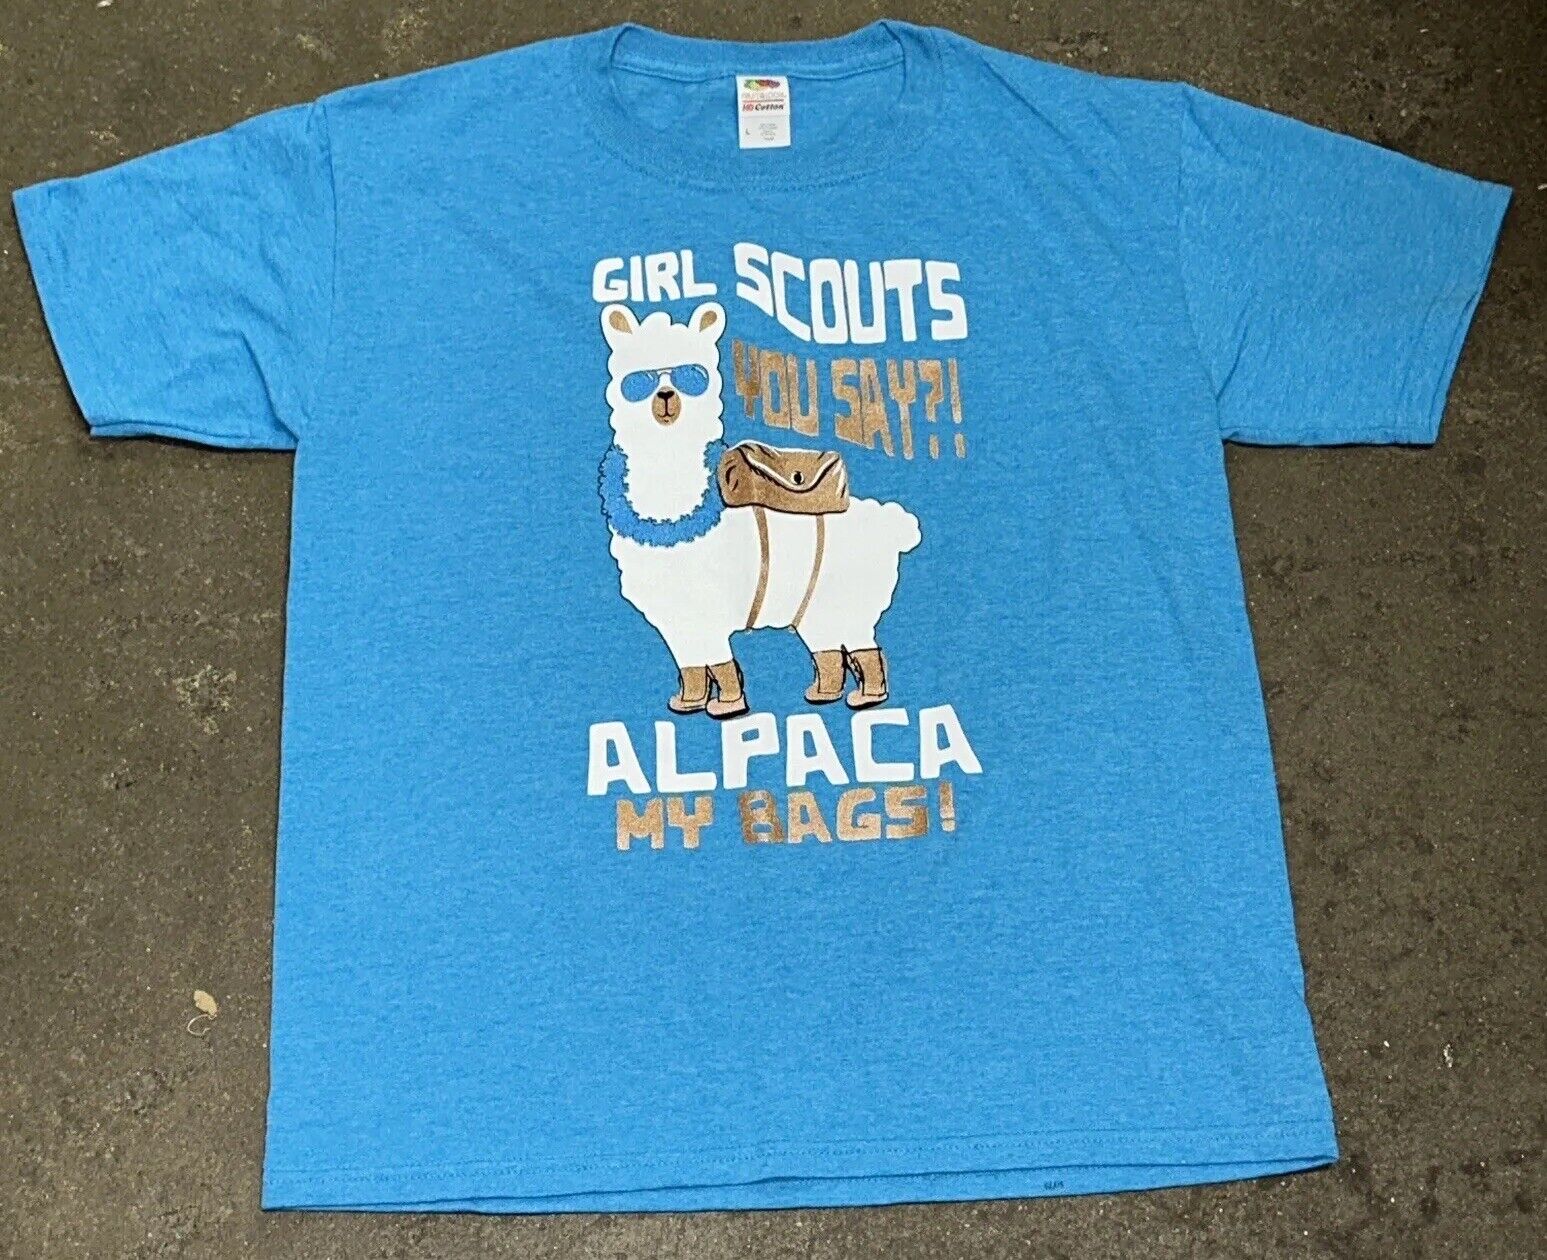 Girl Scouts You Say? Alpaca Image Funny Anime My Bags T Shirt Youth Size Large